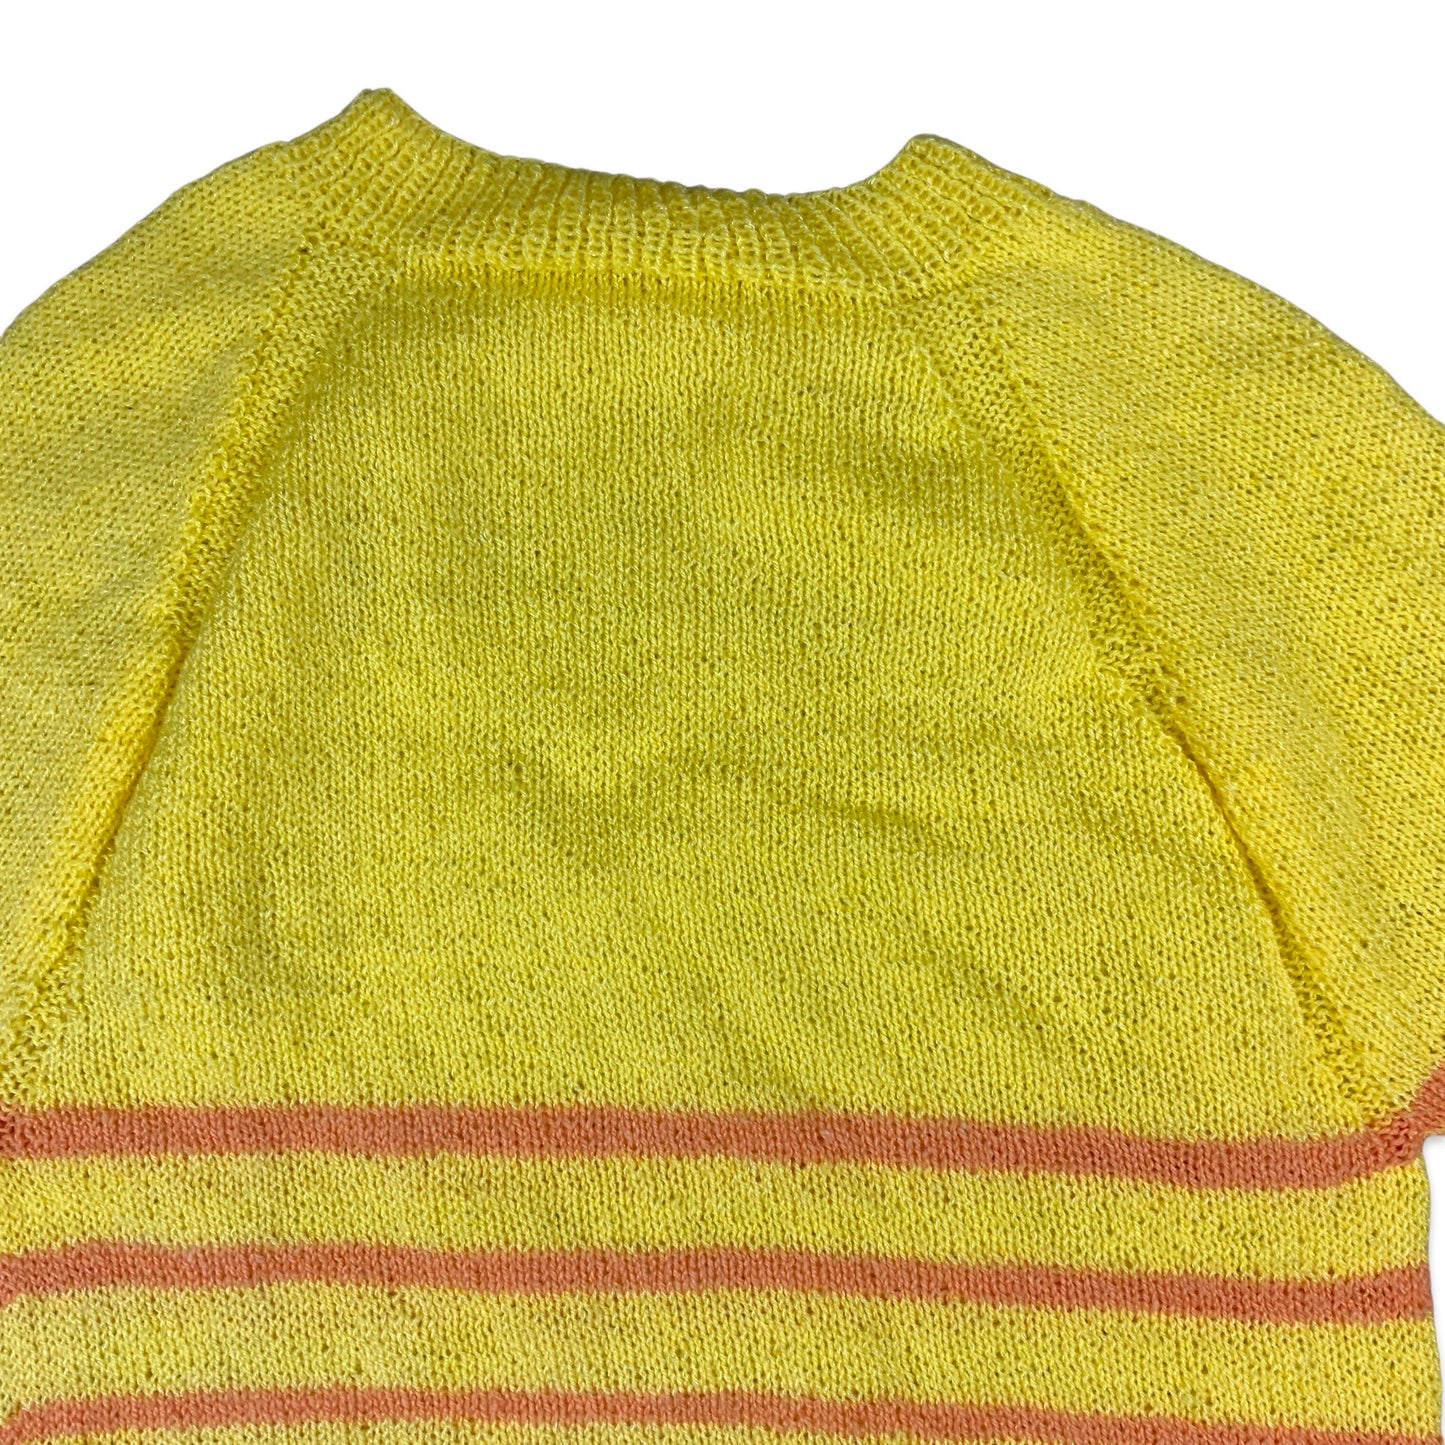 Vintage 80s Yellow & Pink Striped Knitted Jumper 8 10